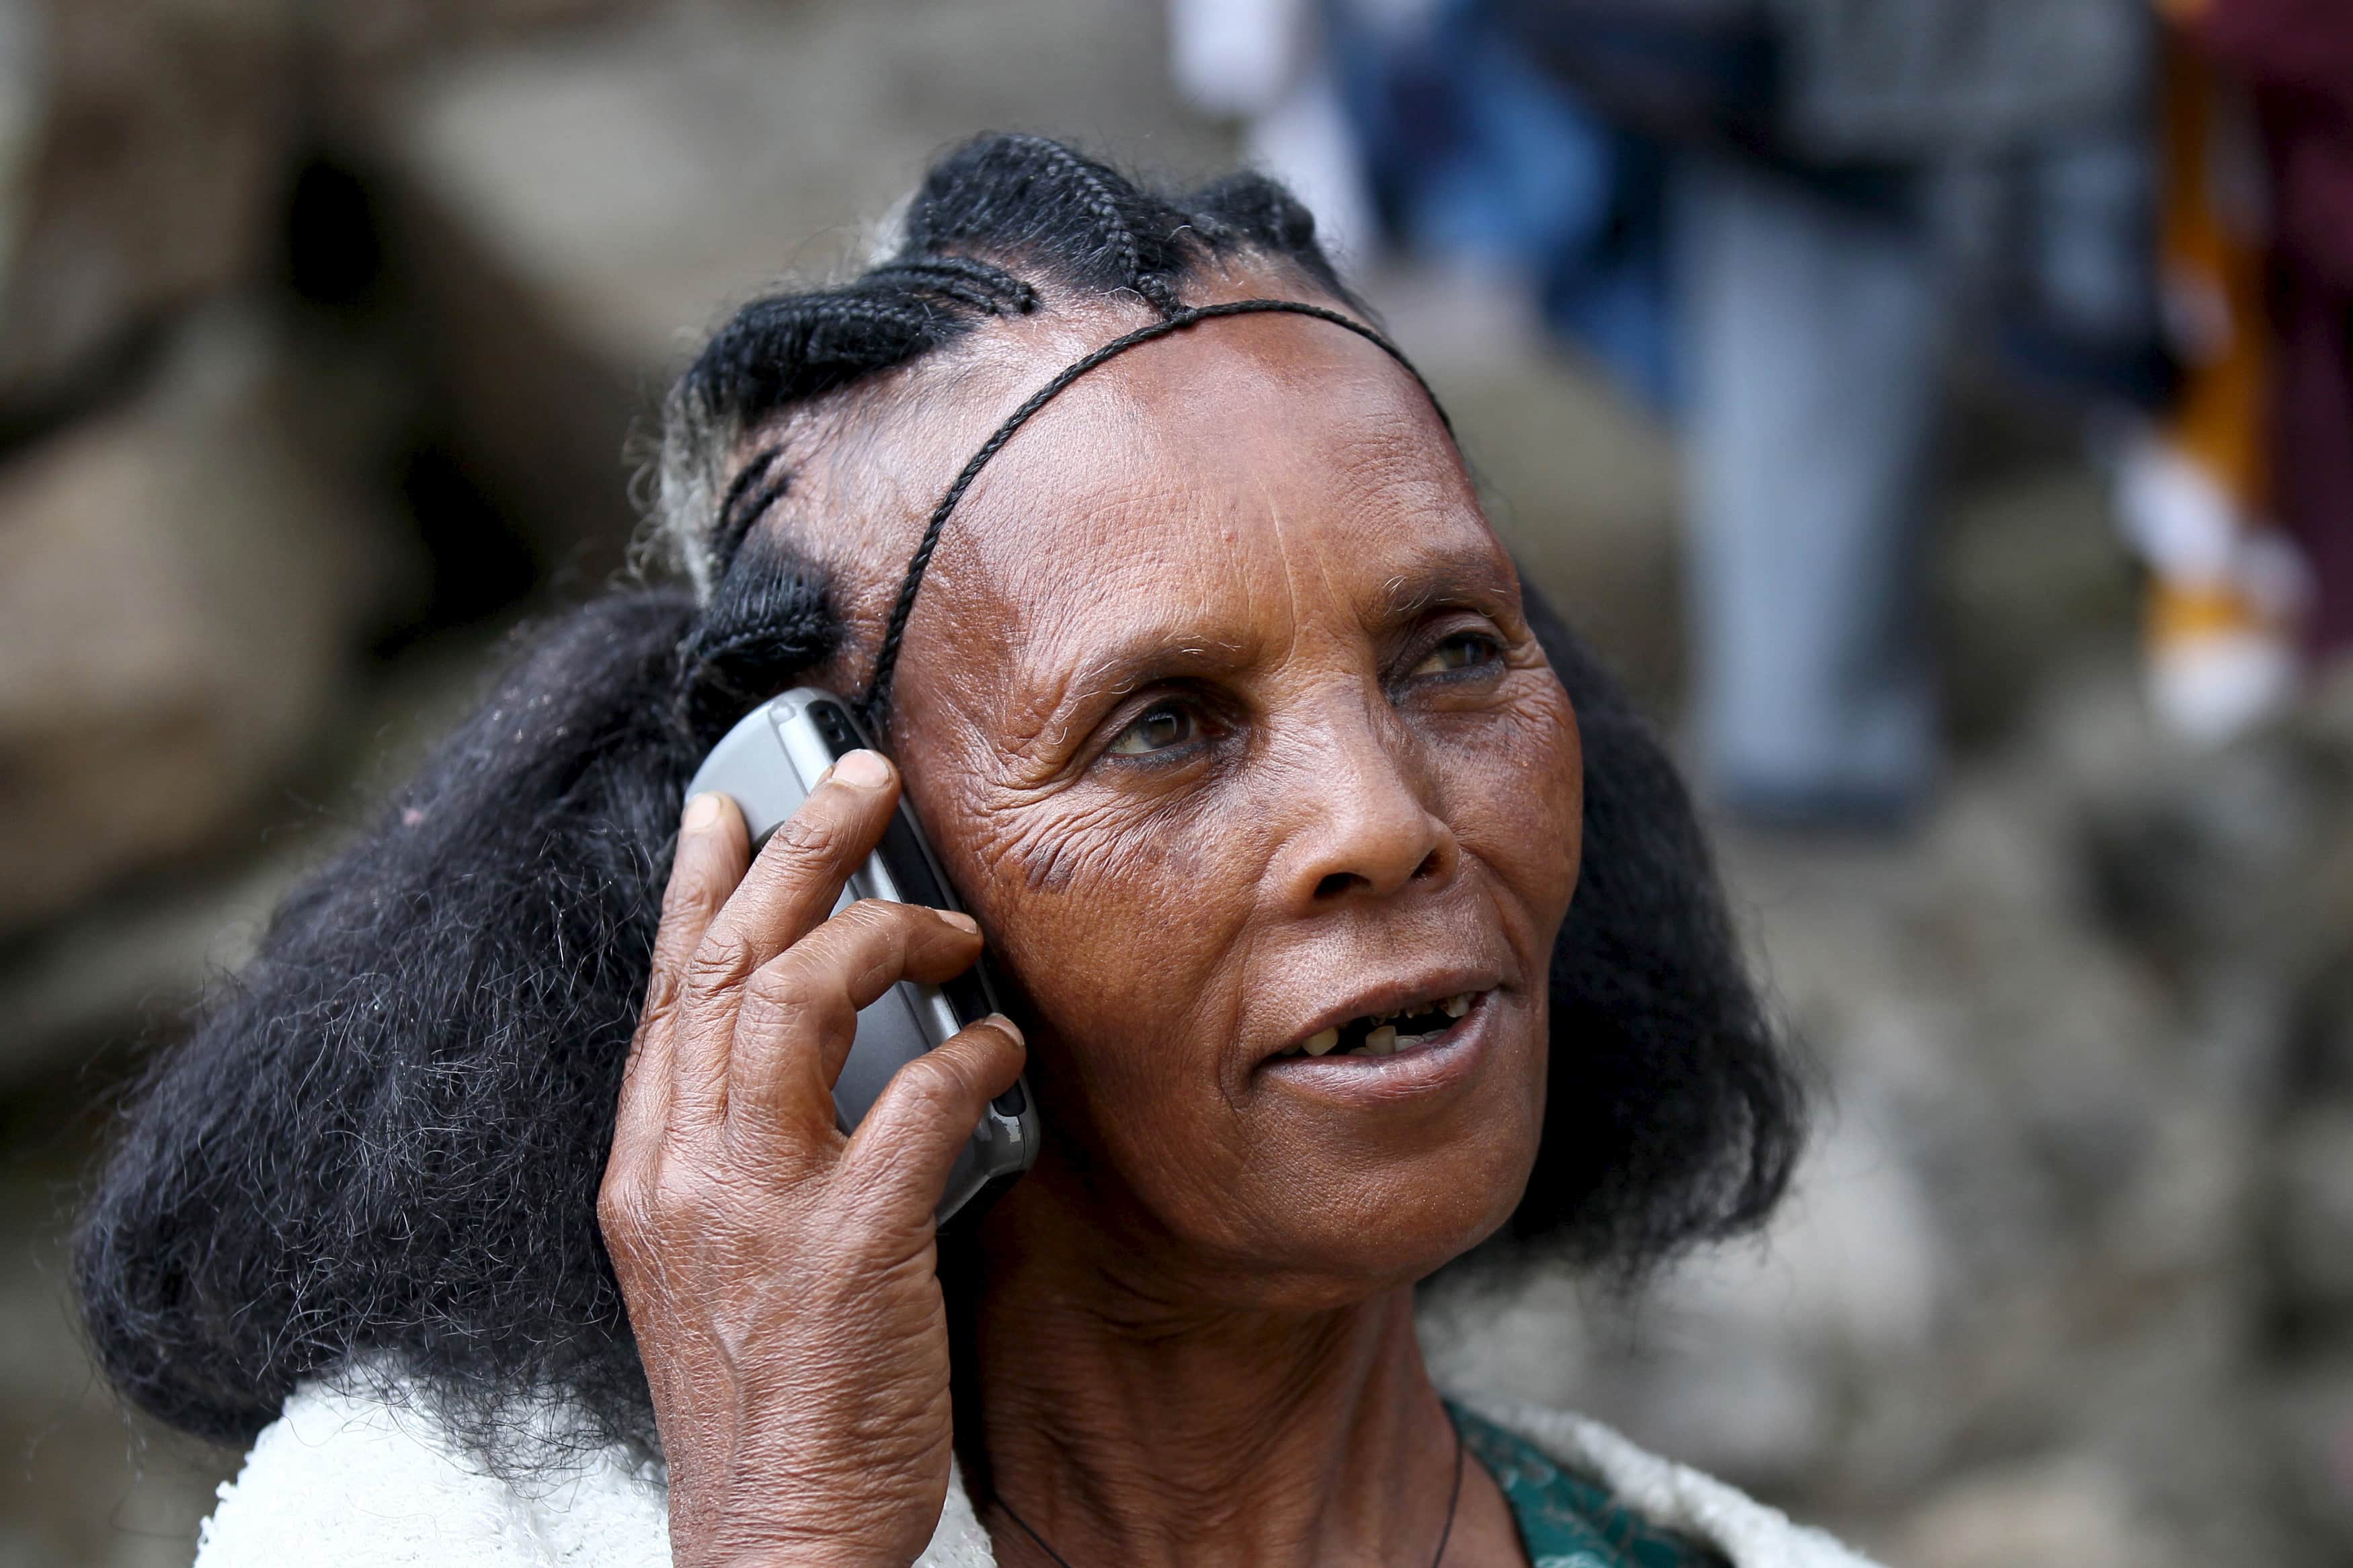 A woman makes a call on her mobile phone in Ethiopia's capital, Addis Ababa, 9 November 2015, REUTERS/Tiksa Negeri